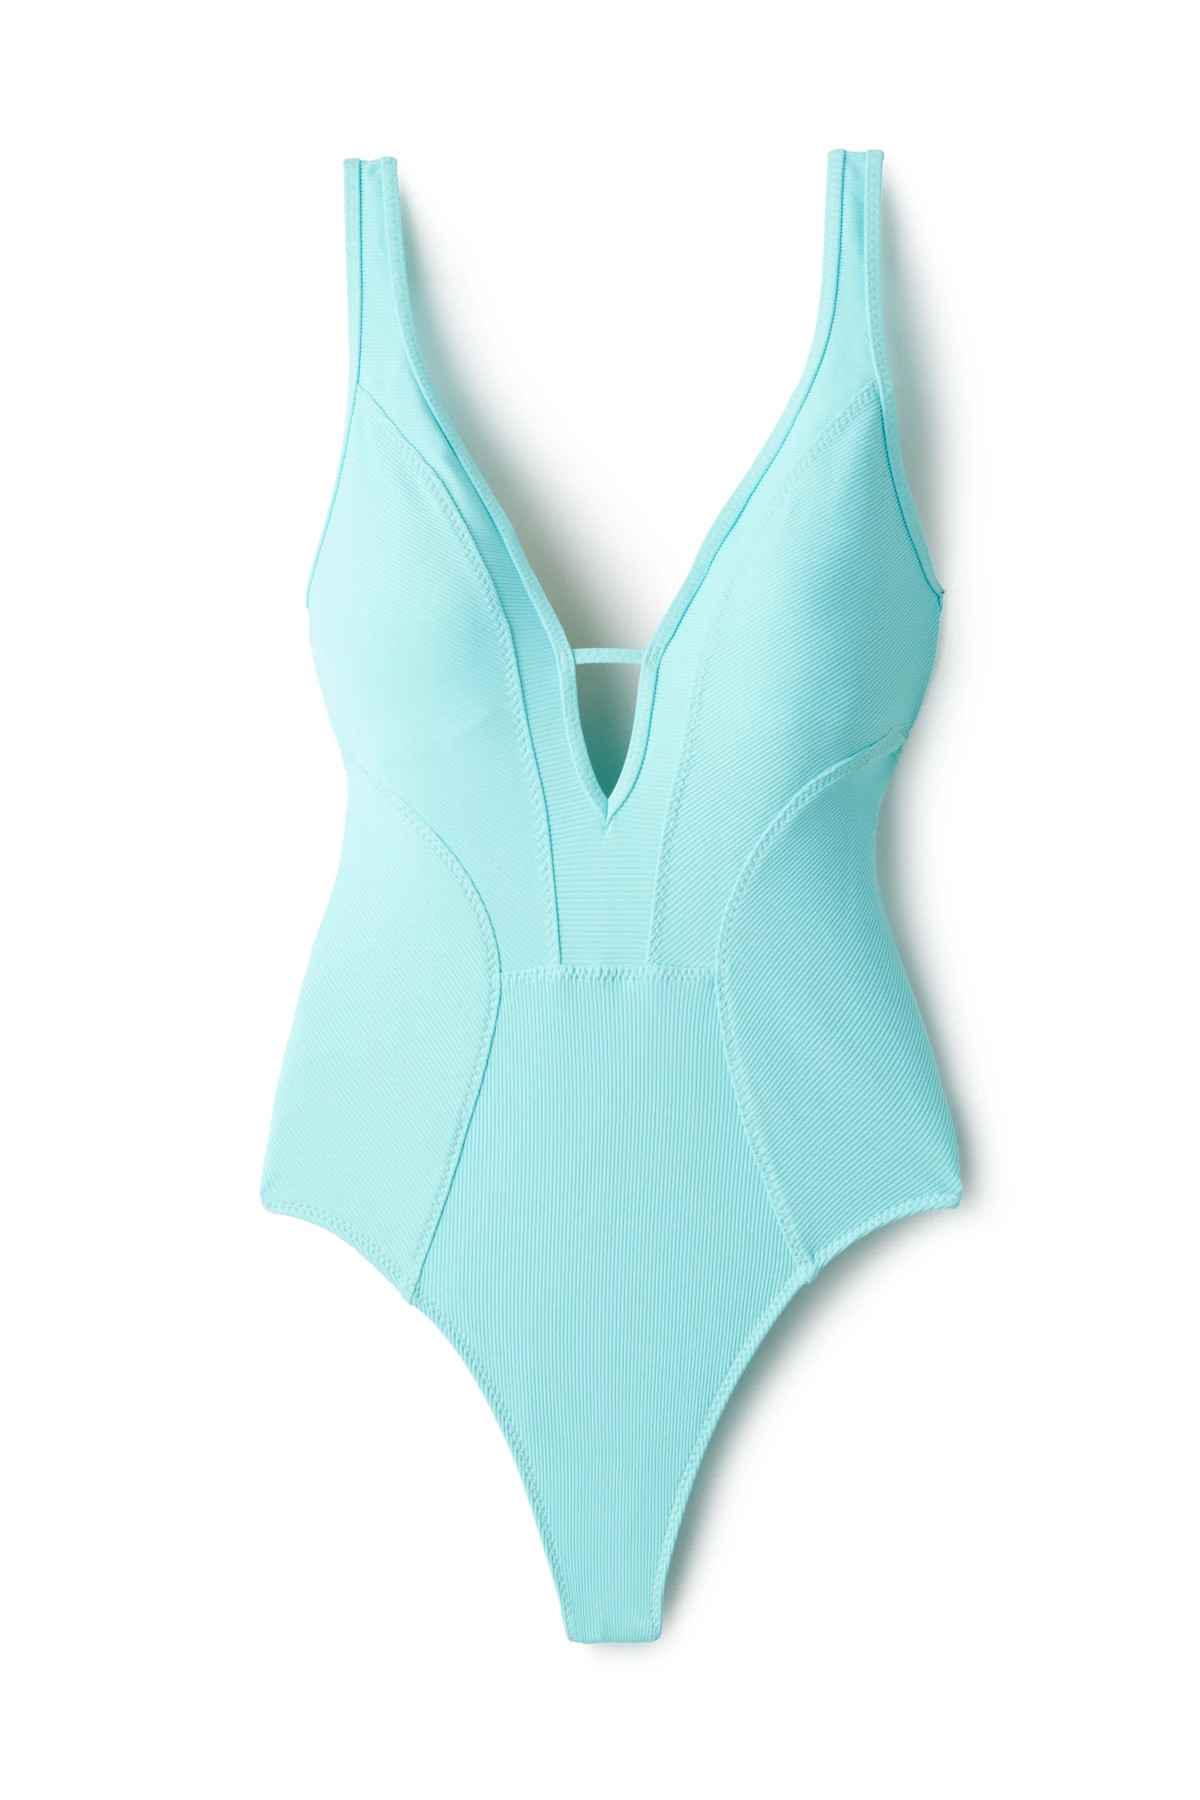 SEA GLASS Modern Edge Plunge One Piece Swimsuit image number 3